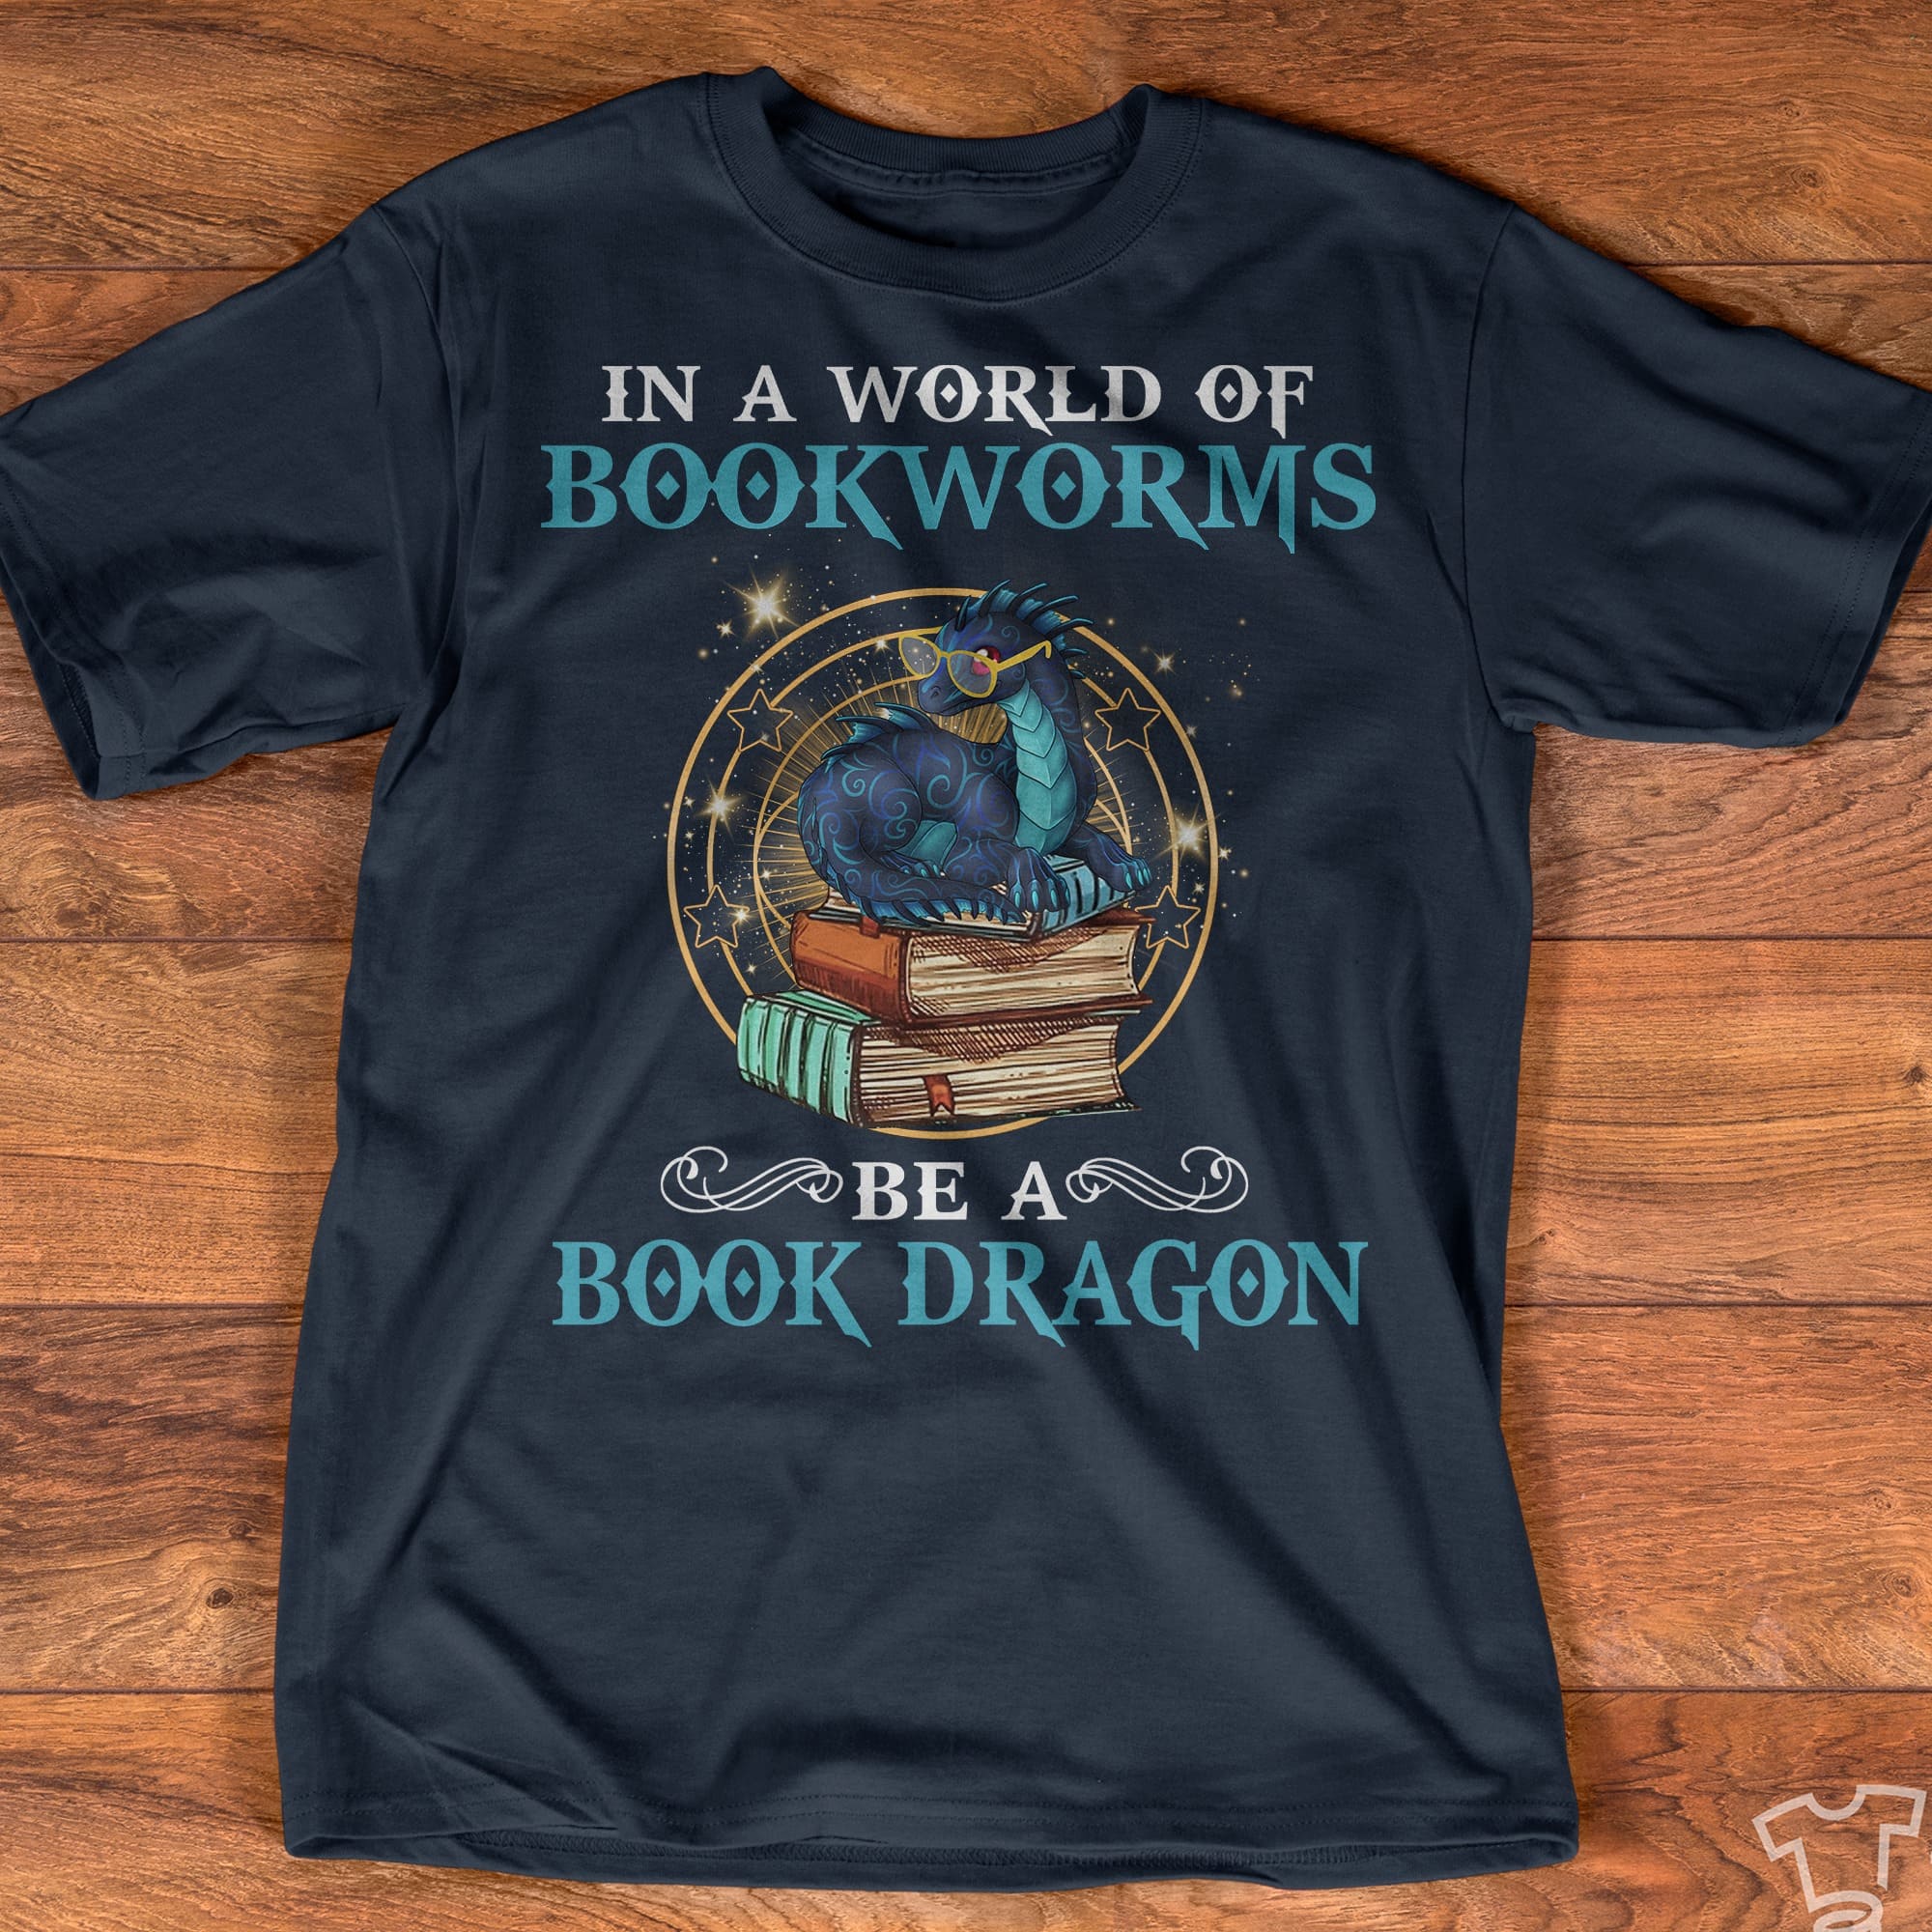 In a world of bookworms, be a book dragon - Gift for book reader, reading the hobby